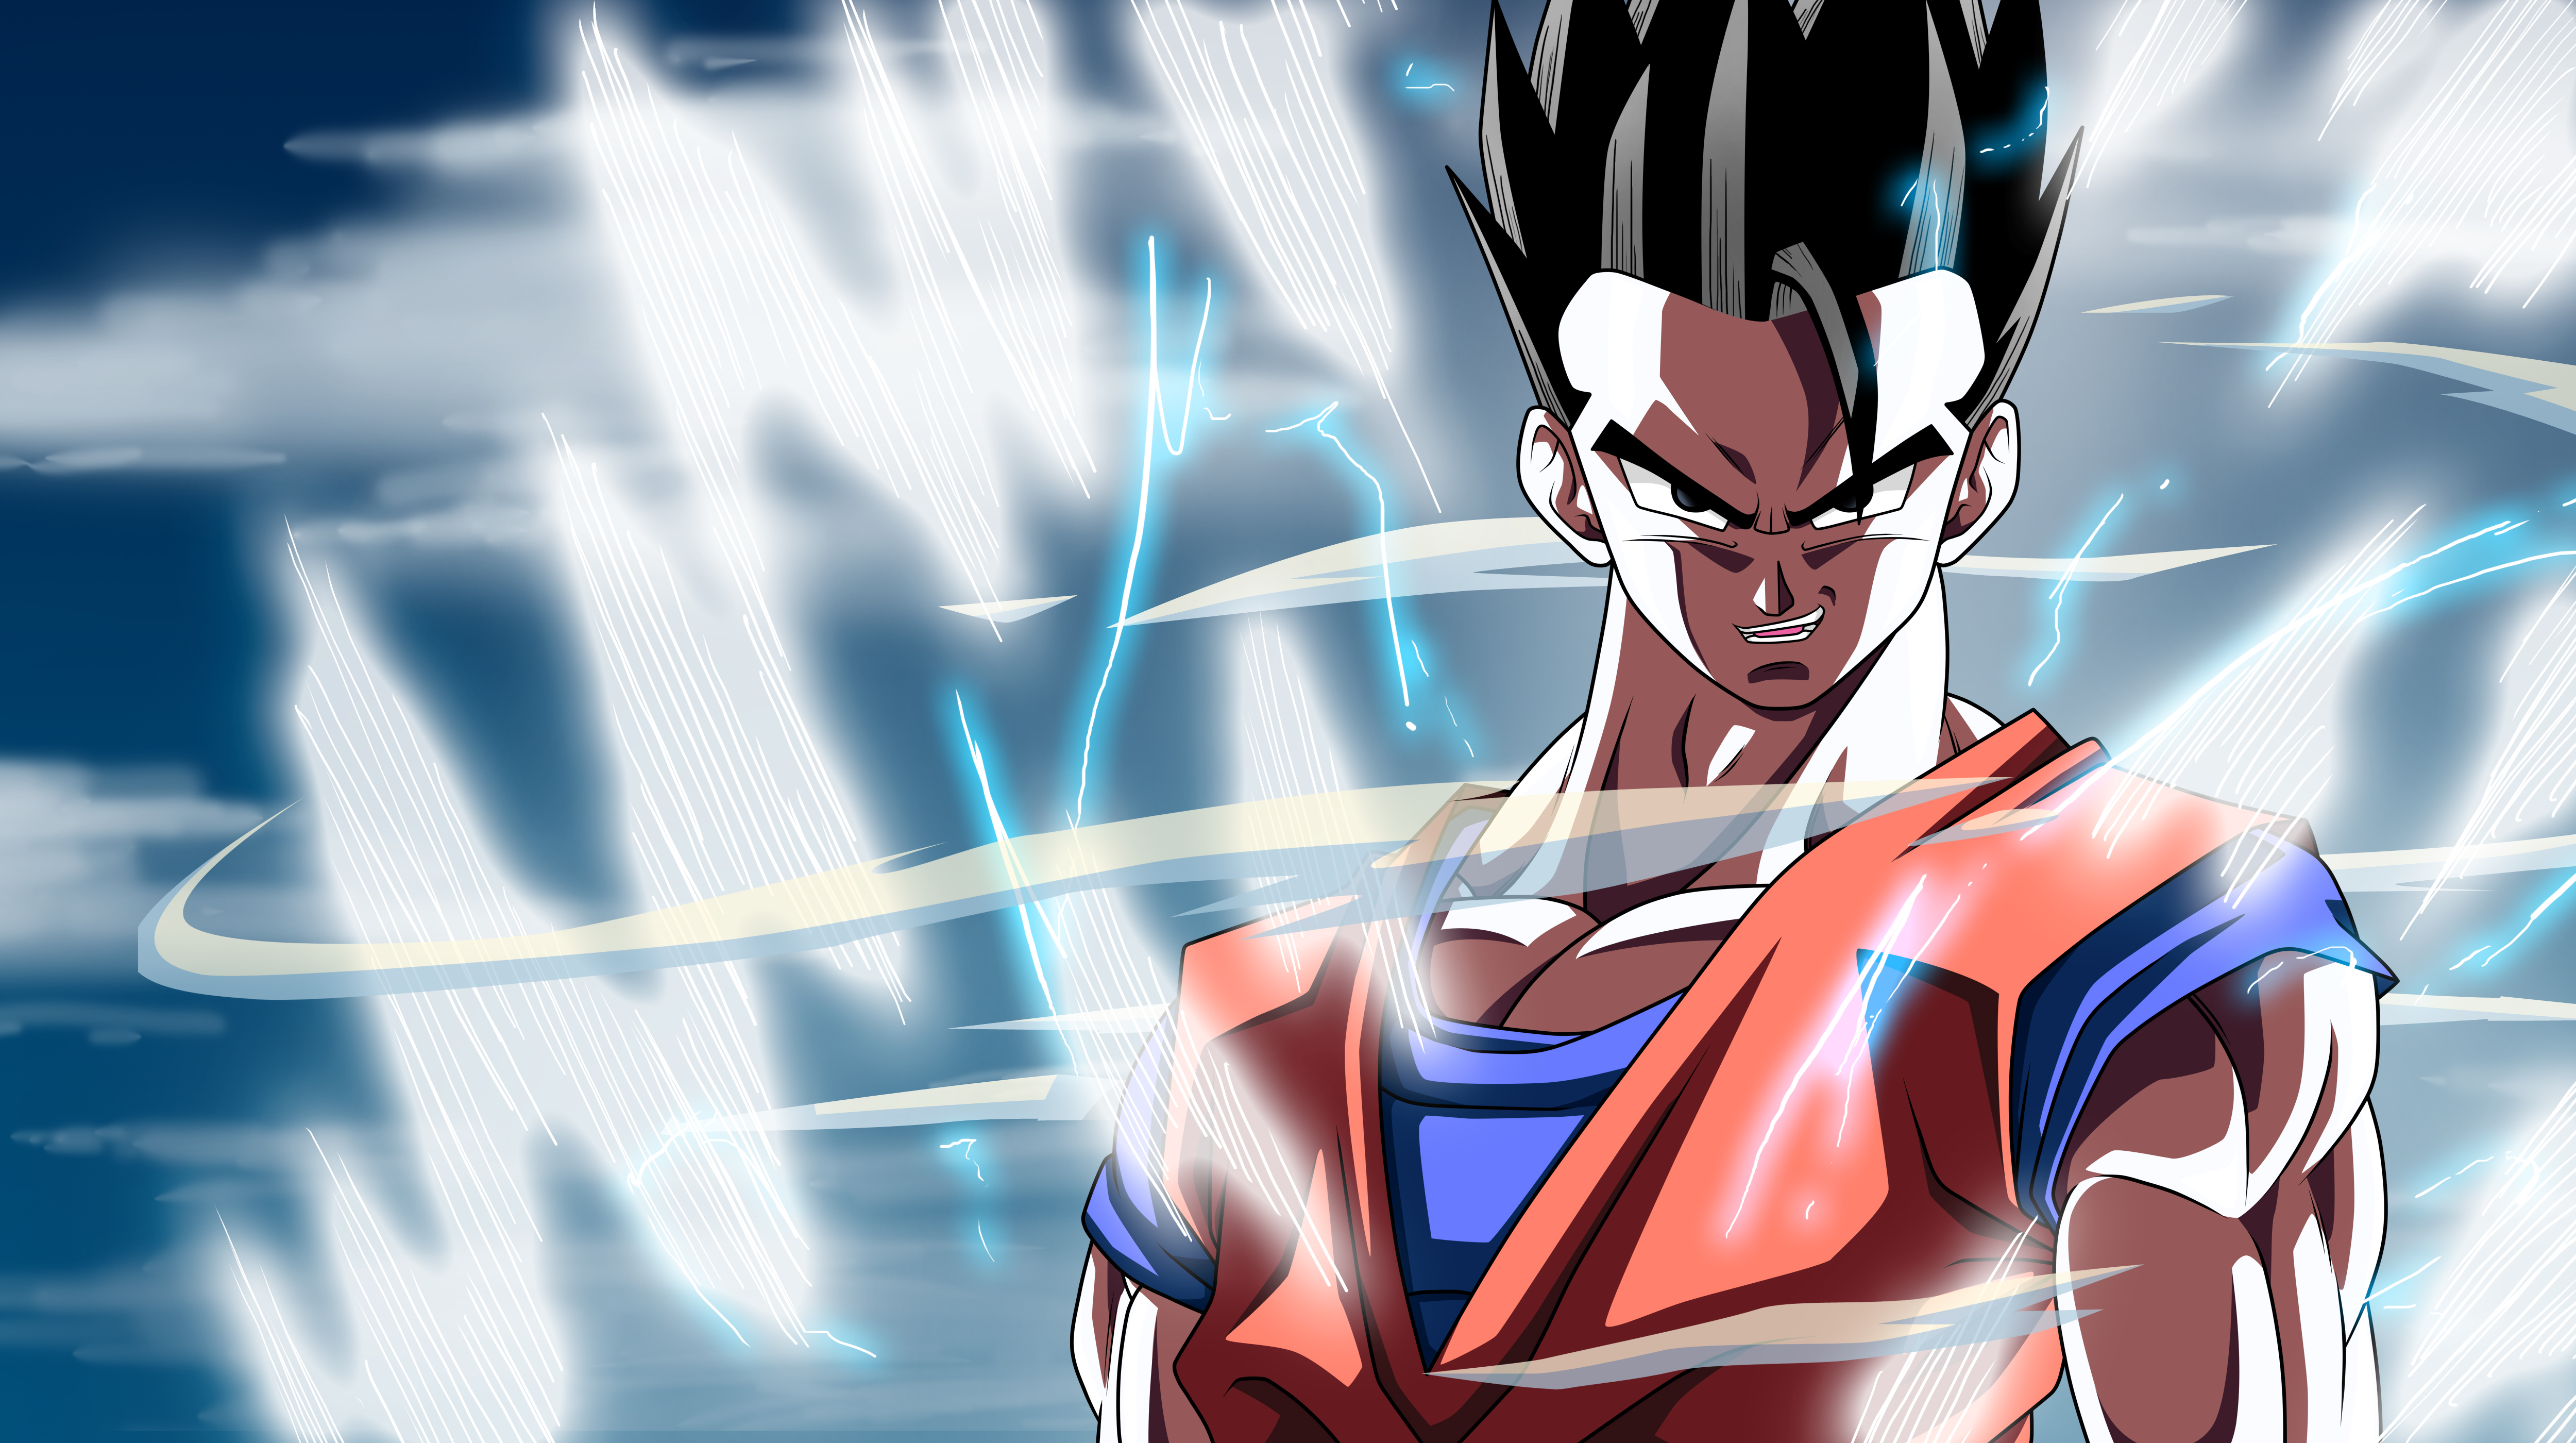 Gohan dragon ball hd papers and backgrounds